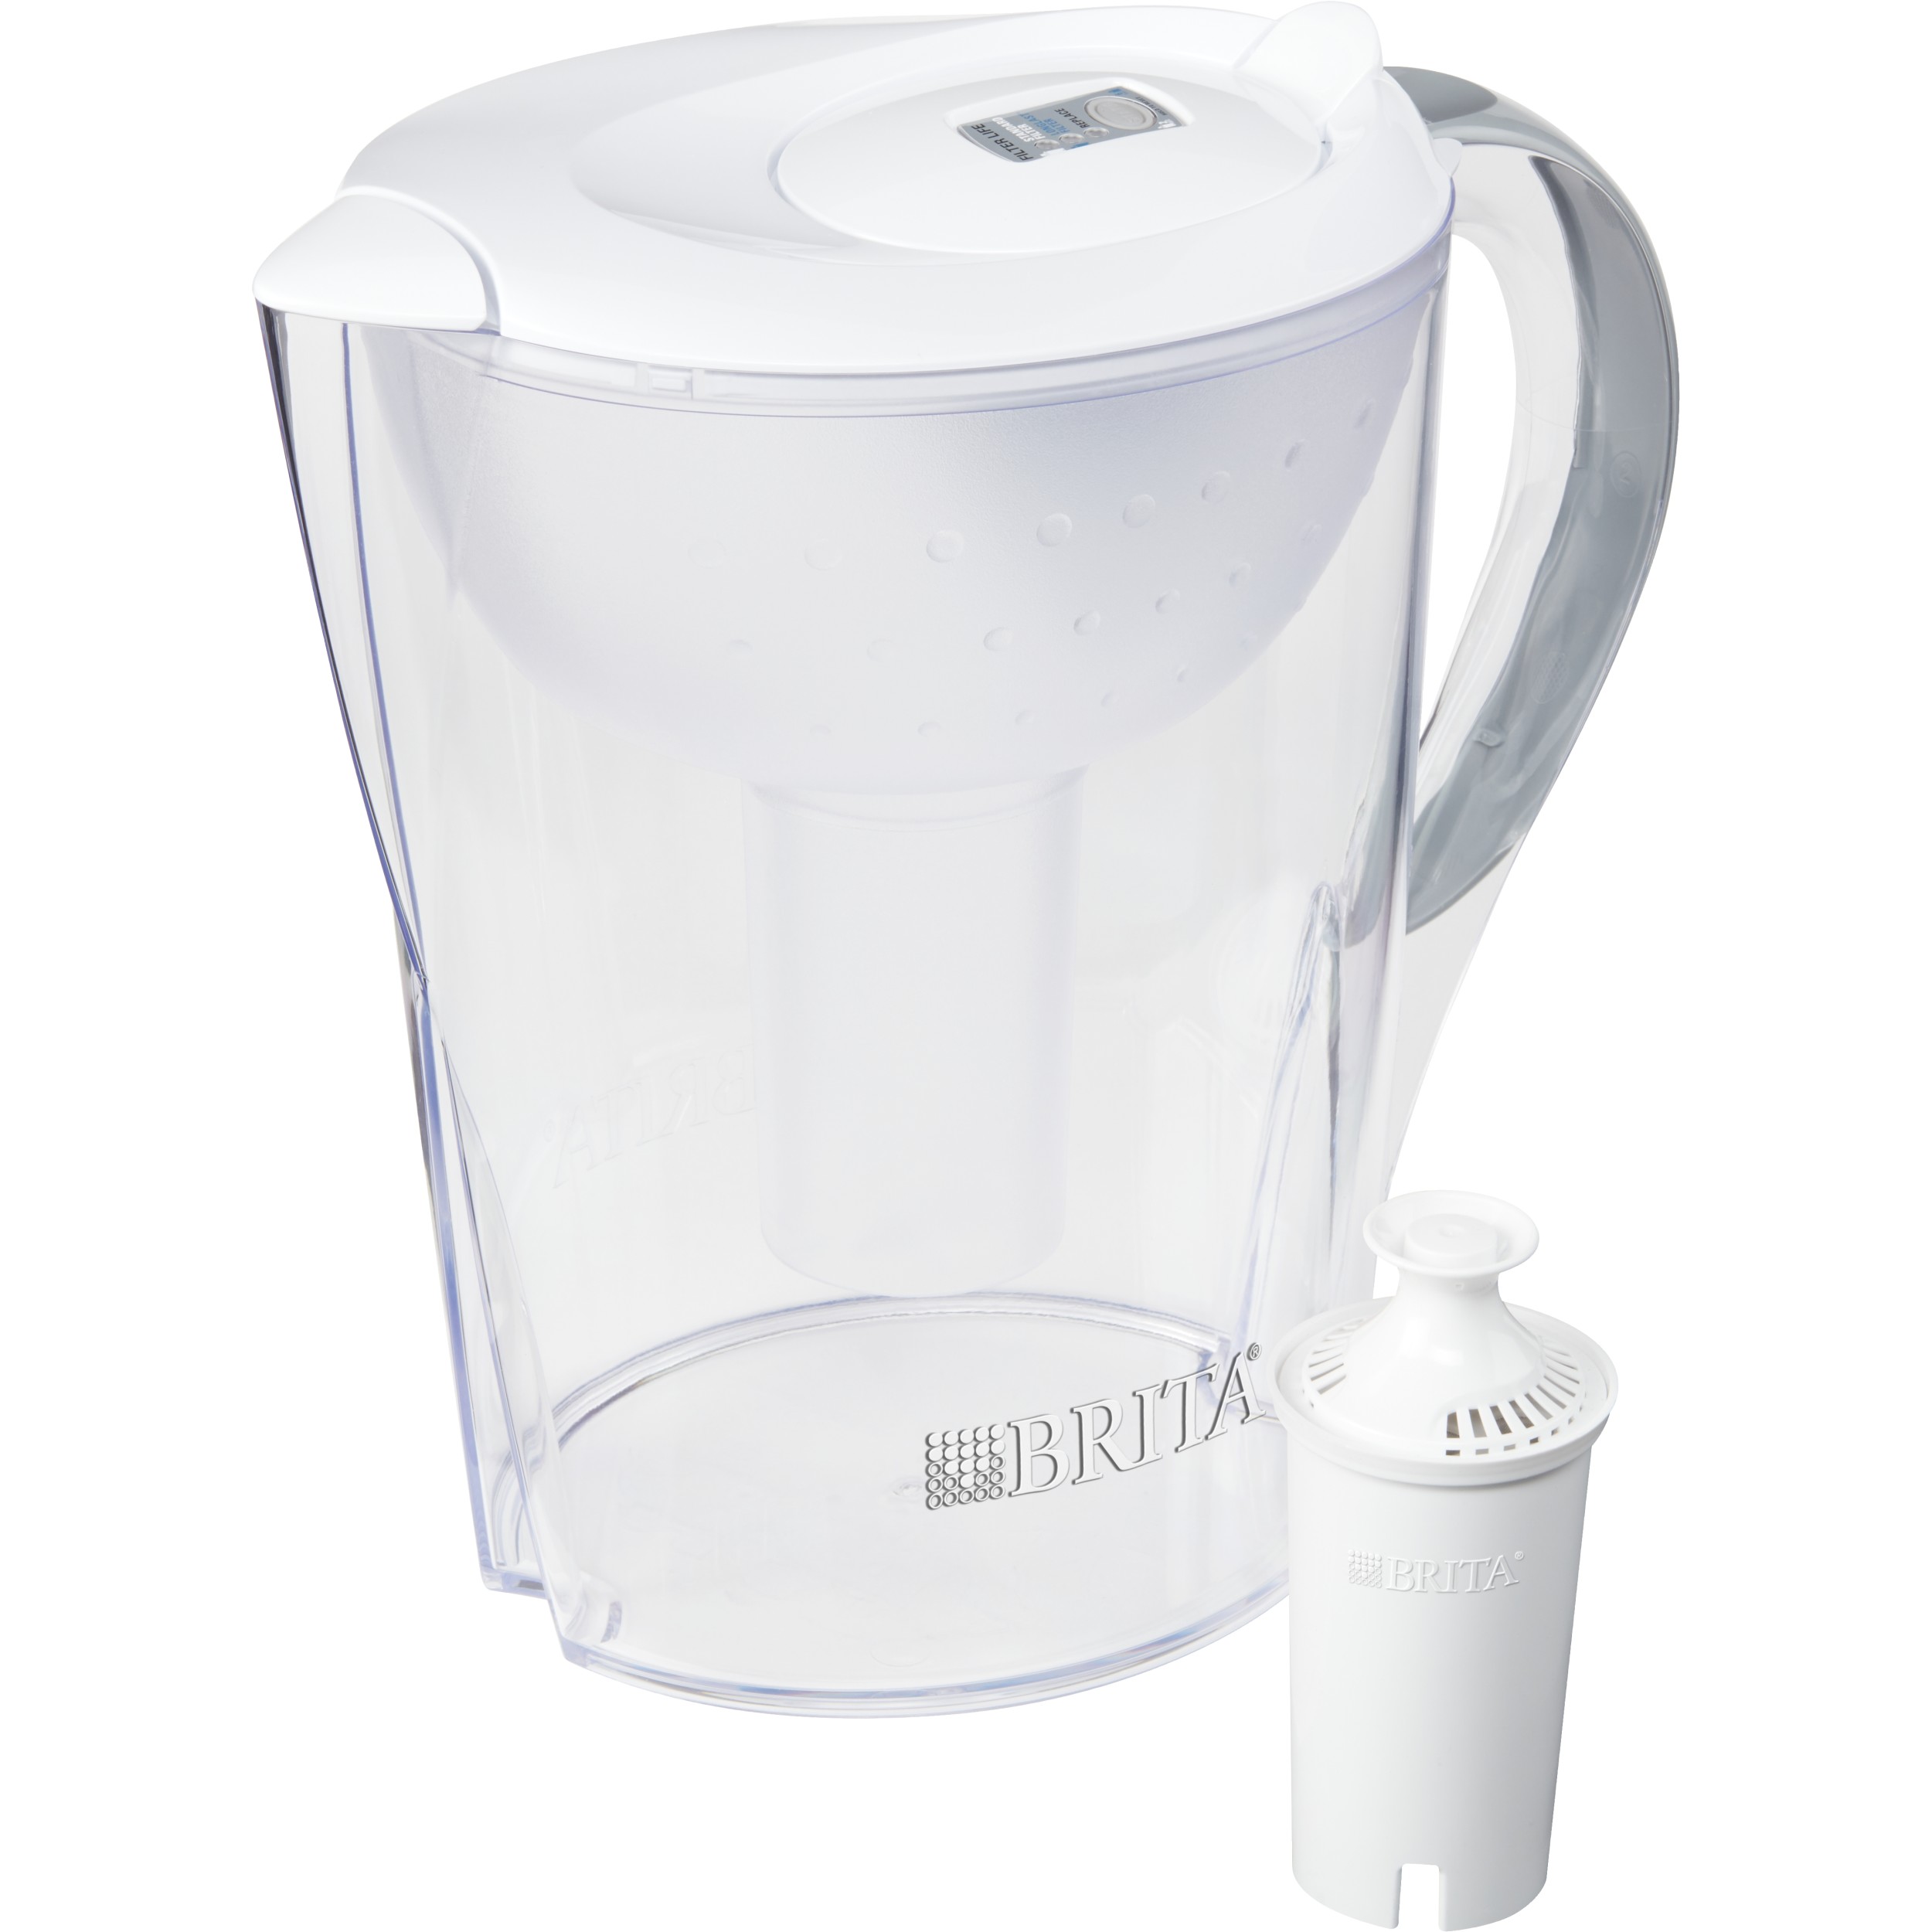 White Everyday Filtering Pitcher with Replacement Filters